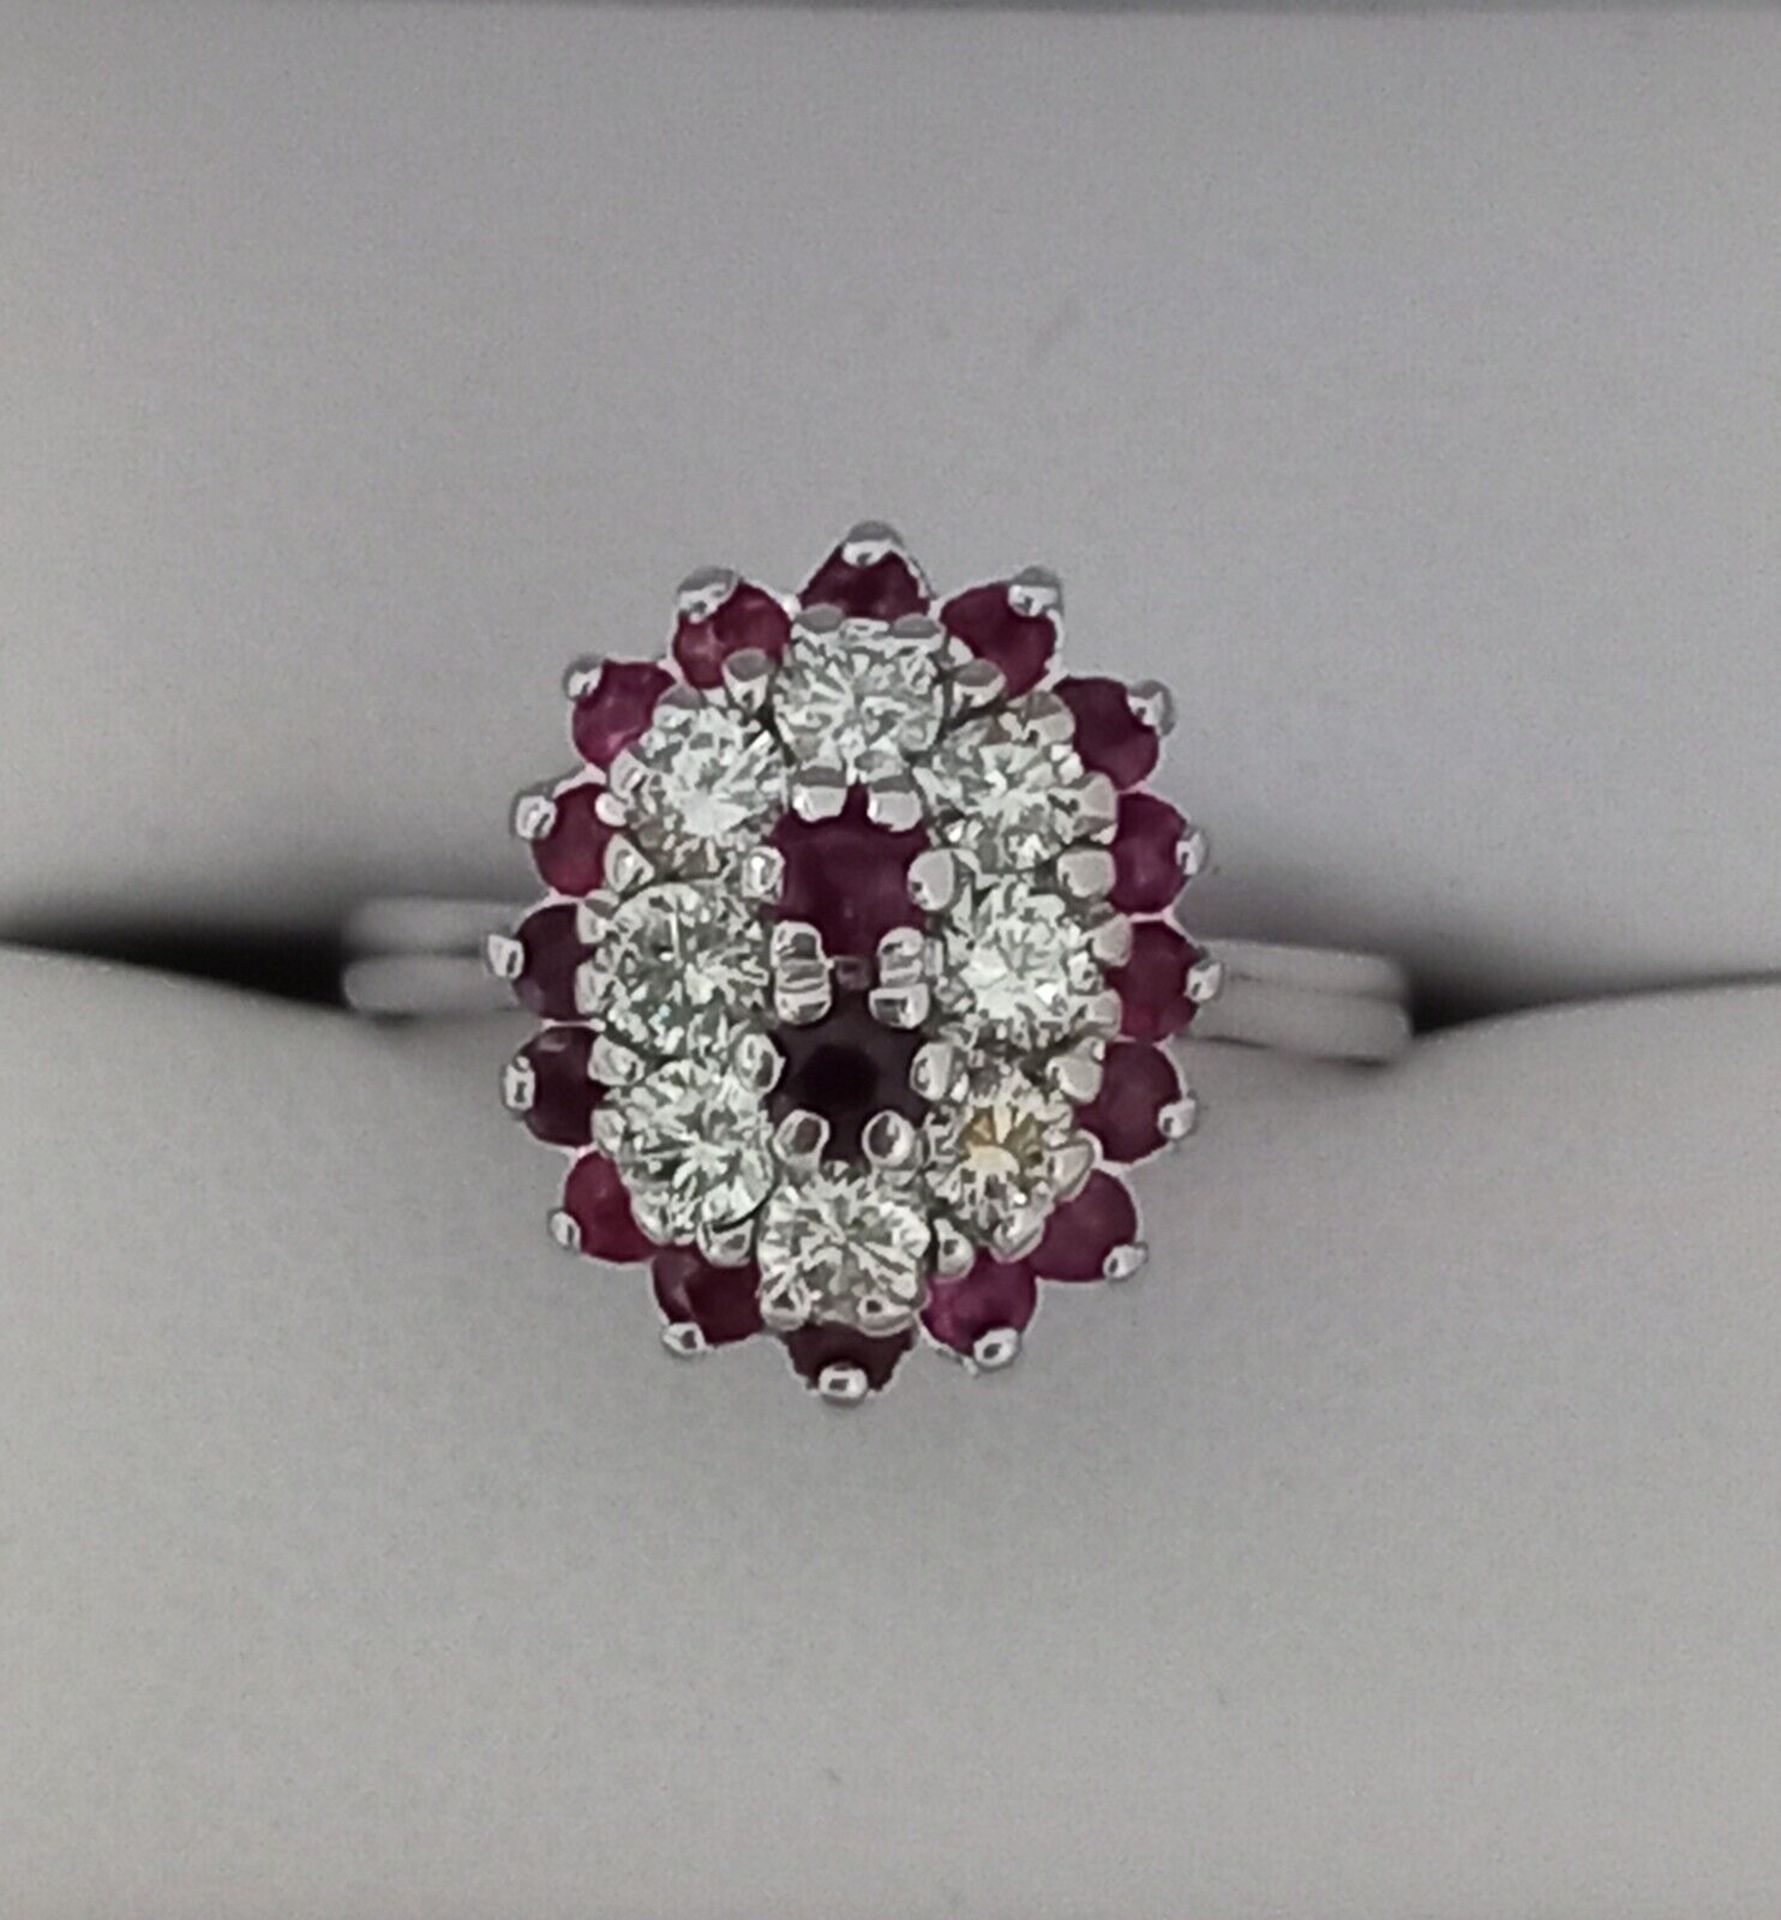 RUBY & 0.55CT DIAMOND CLUSTER RING 18CT WHITE GOLD + GIFT BOX + VALUATION CERTIFICATE OF £3500 - Image 3 of 7